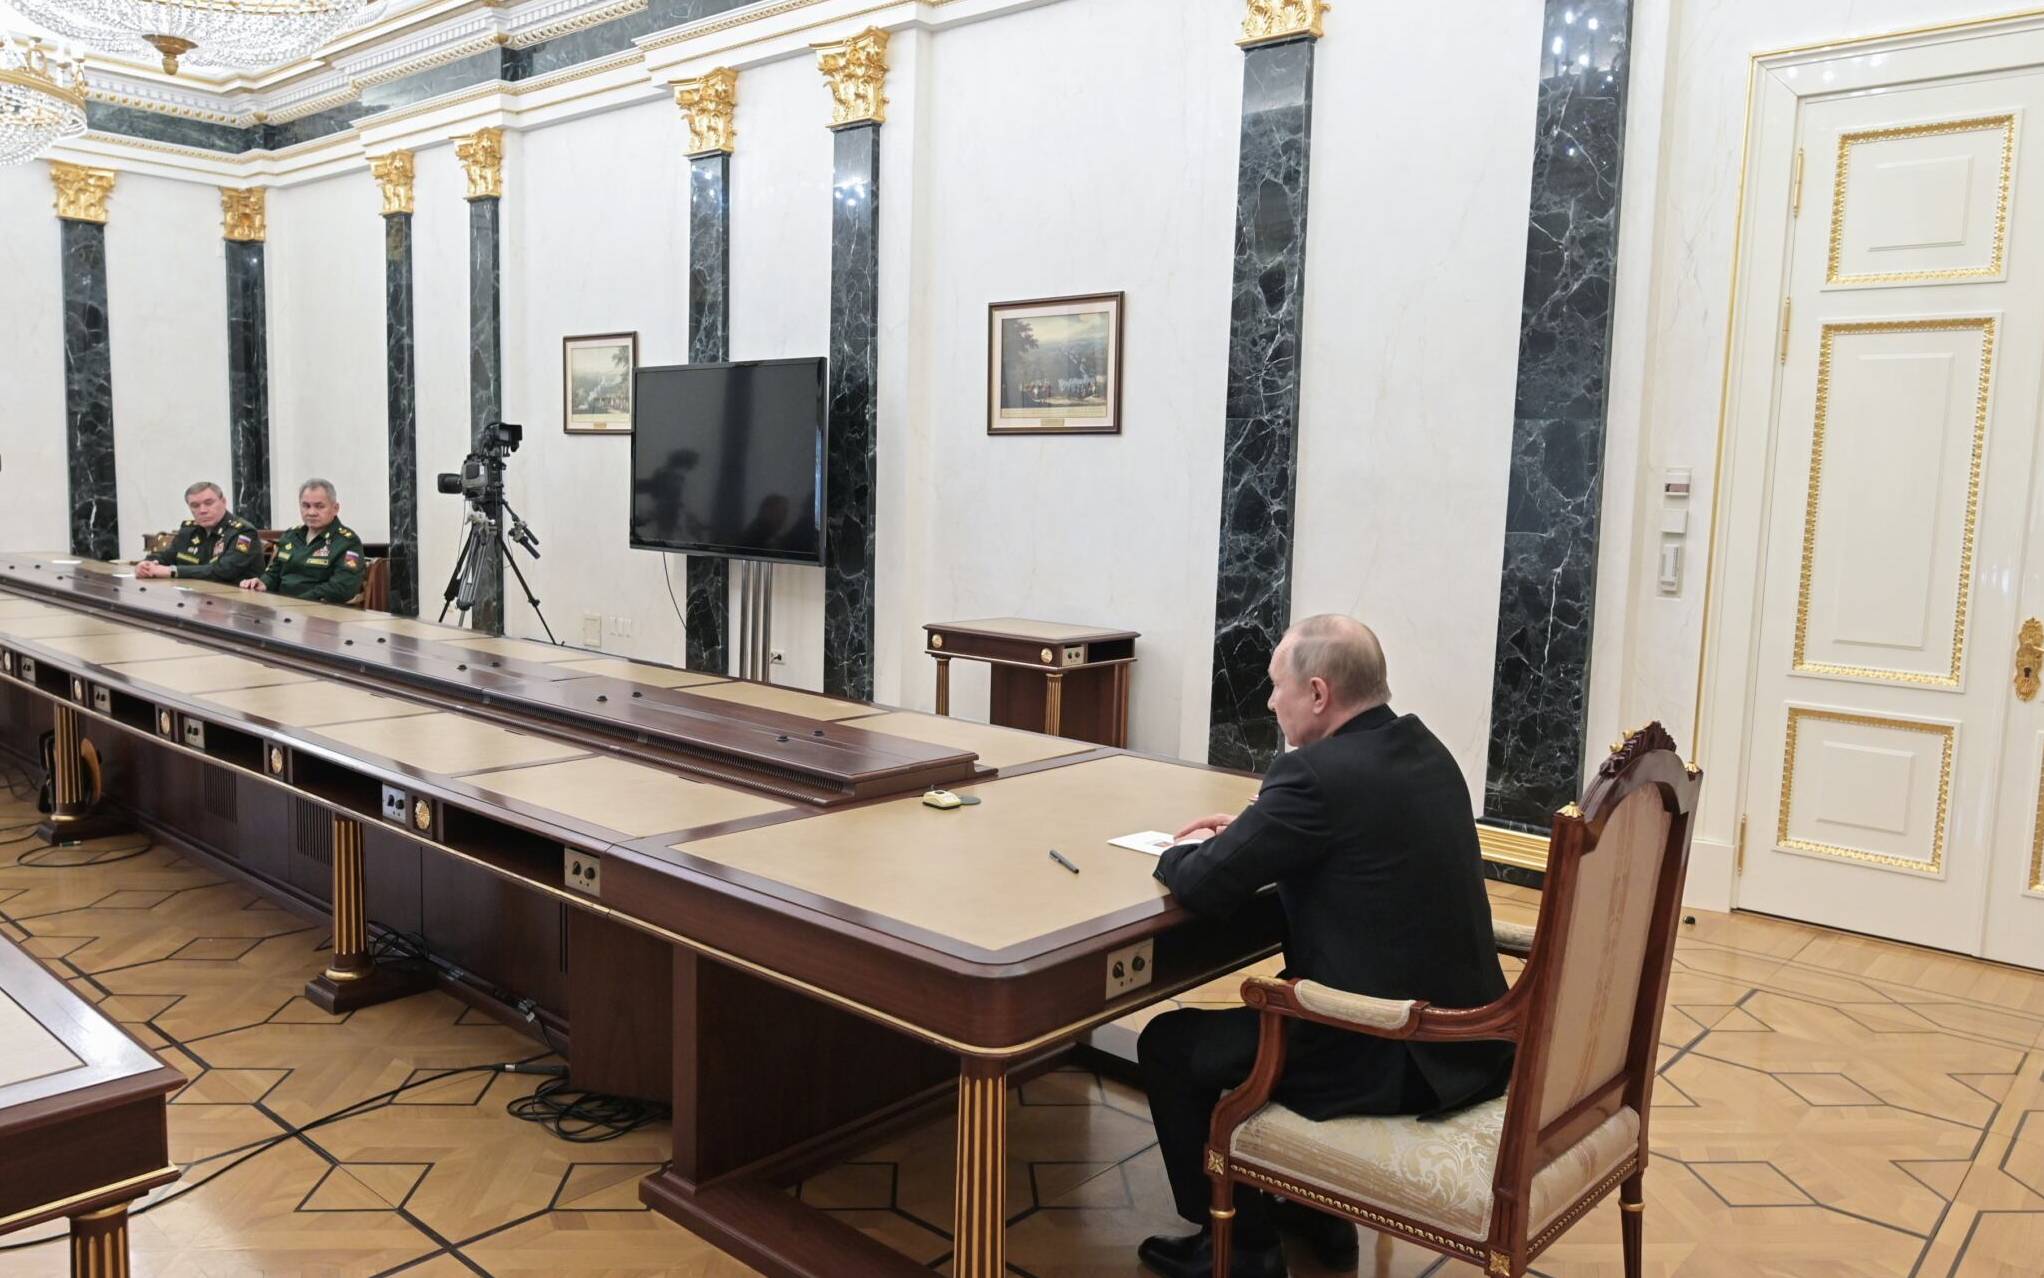 Russian President Vladimir Putin (R) meets with Defence Minister Sergei Shoigu (2L) and chief of the general staff Valery Gerasimov in Moscow on February 27, 2022. - Russian President Vladimir Putin ordered his defence chiefs to put the country's nuclear "deterrence forces" on high alert on February 27 and accused the West of taking "unfriendly" steps against his country. (Photo by Alexey NIKOLSKY / SPUTNIK / AFP)